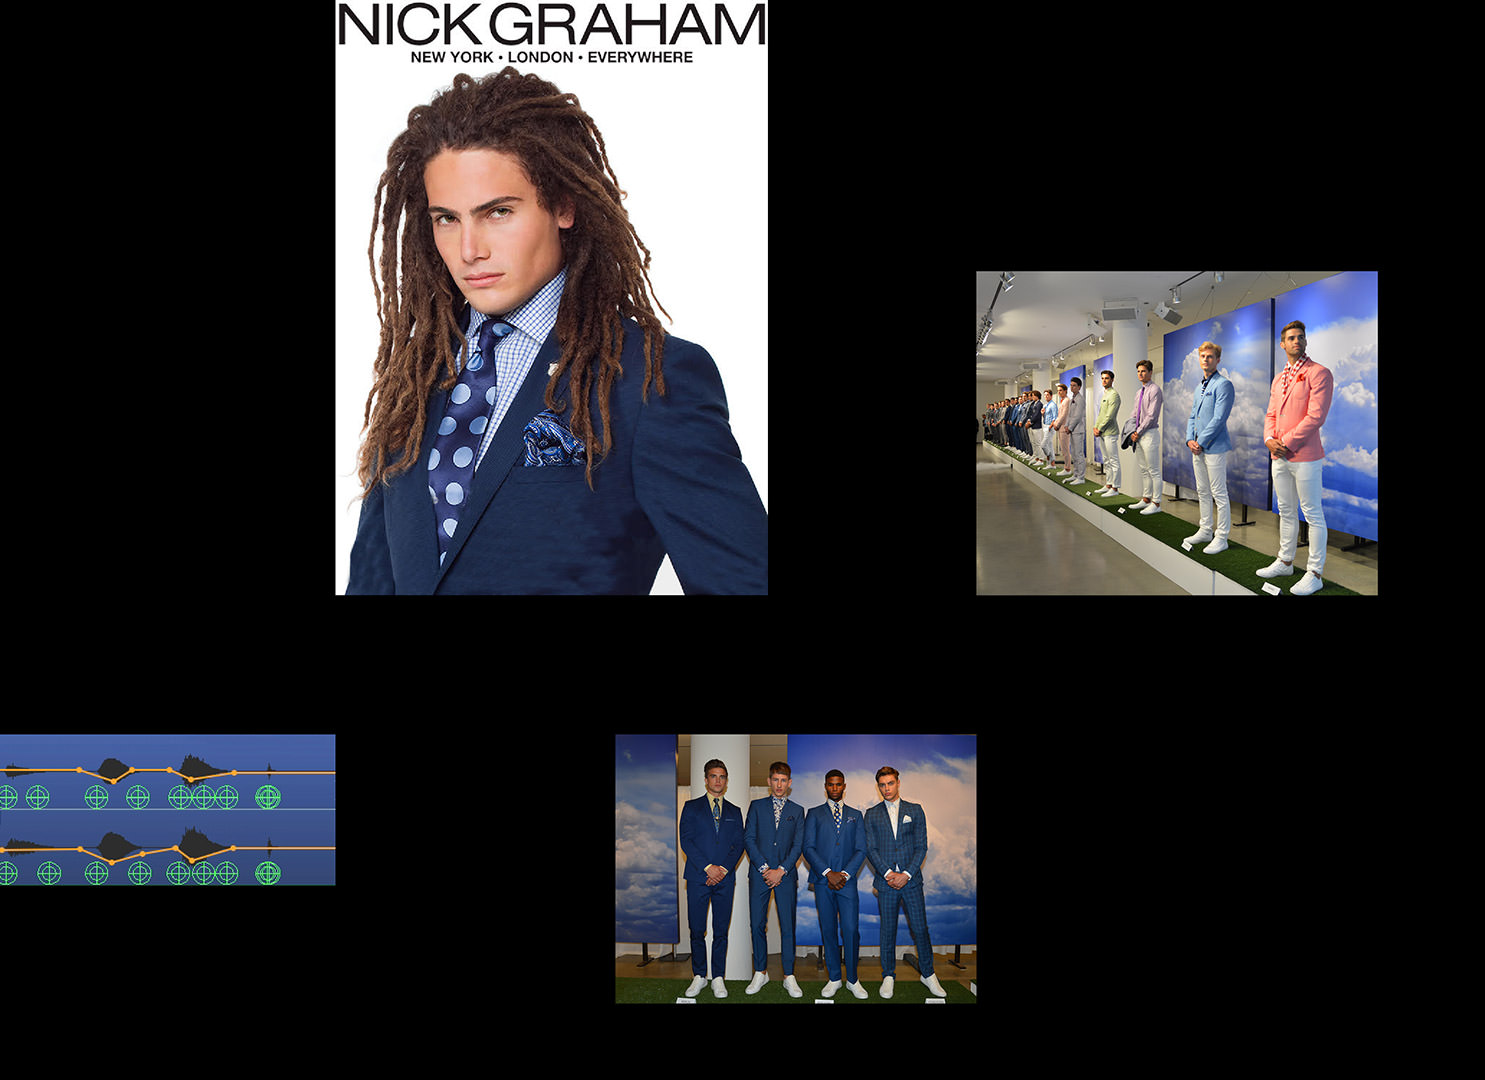 Spatial audio for the Nick Graham menswear launch